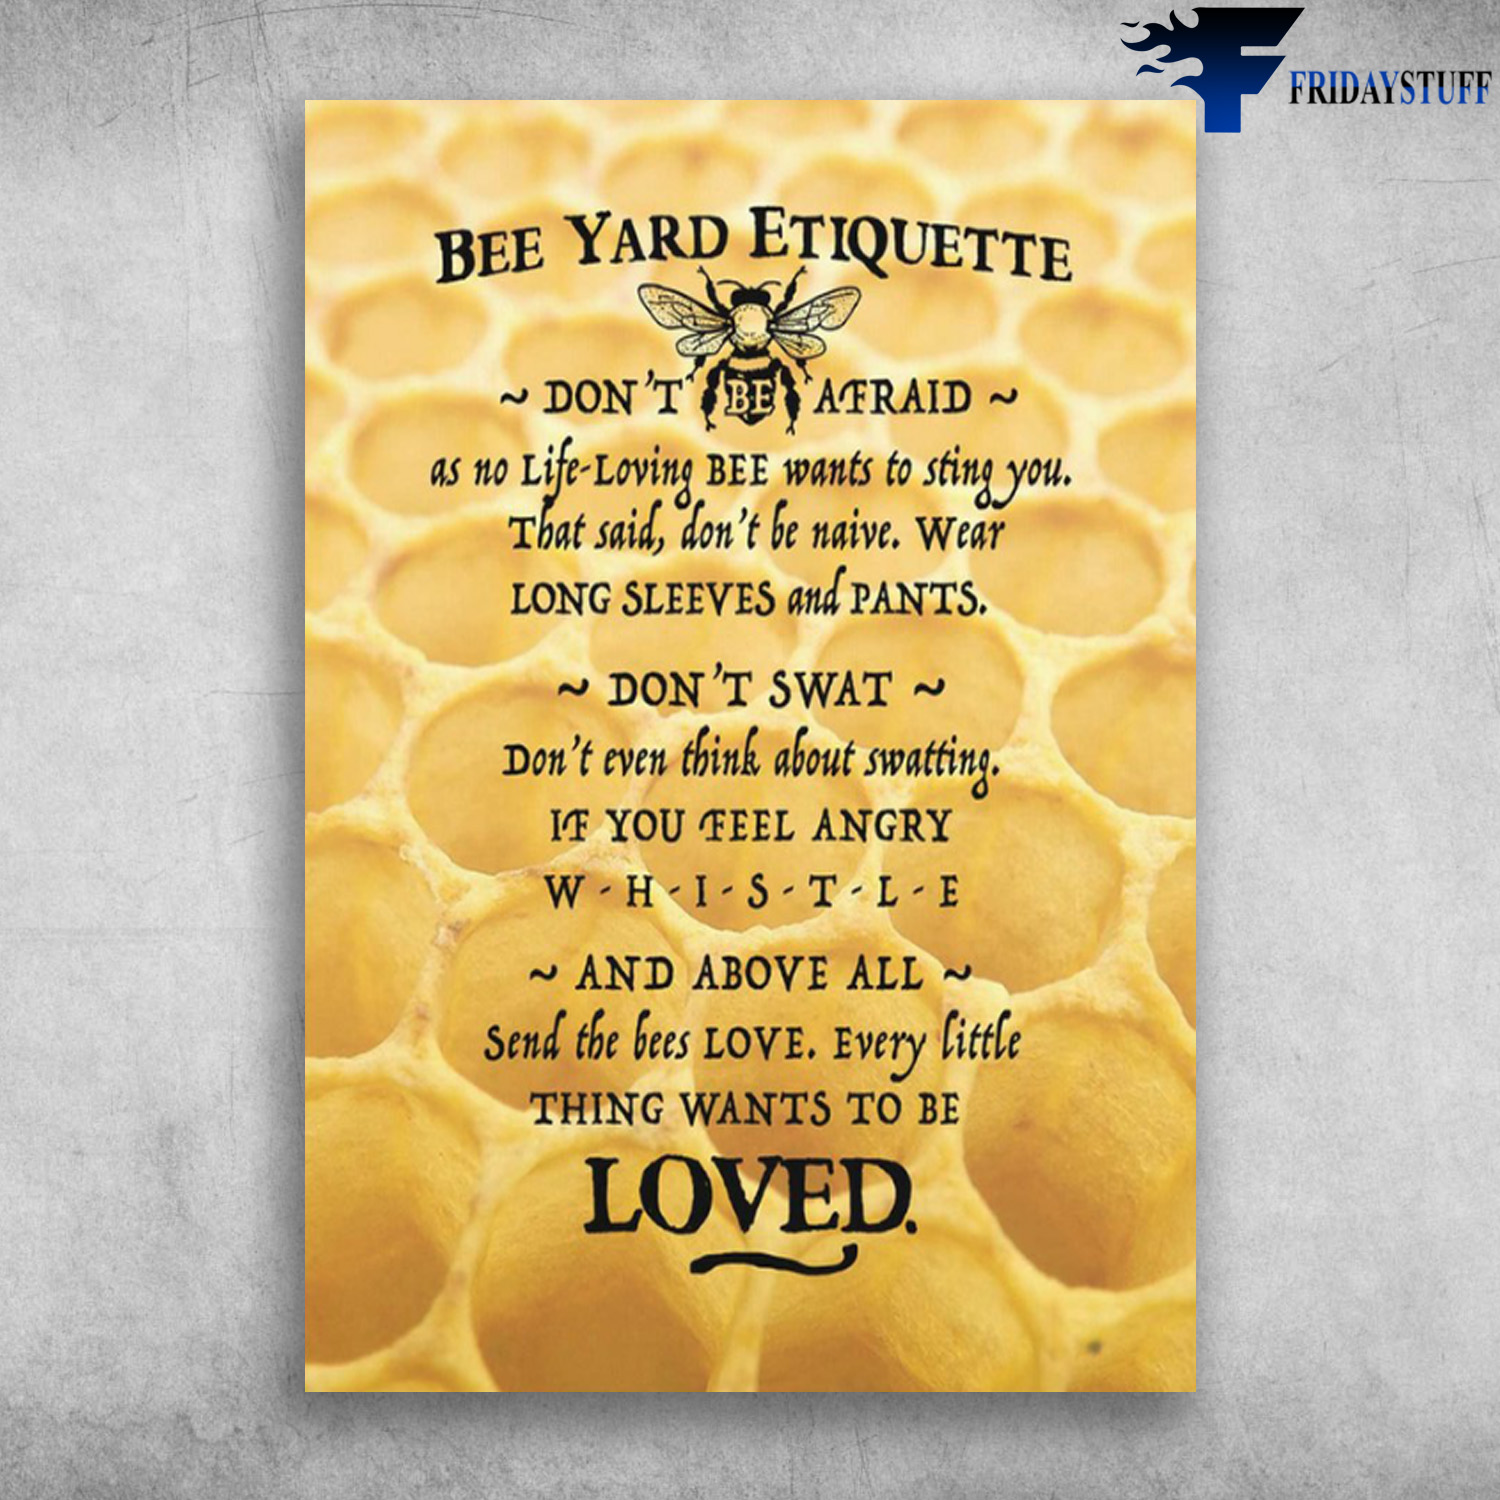 Bee Yard Etiquette - Don't Be Afraid, As No Life, Loving Bee Wants To Sting You, That Said, Don't Be Naive, Wear Long Sleeves And Pants, Don't Swat, Don't Even Think About Swatting, If You Feel Angry, Loved